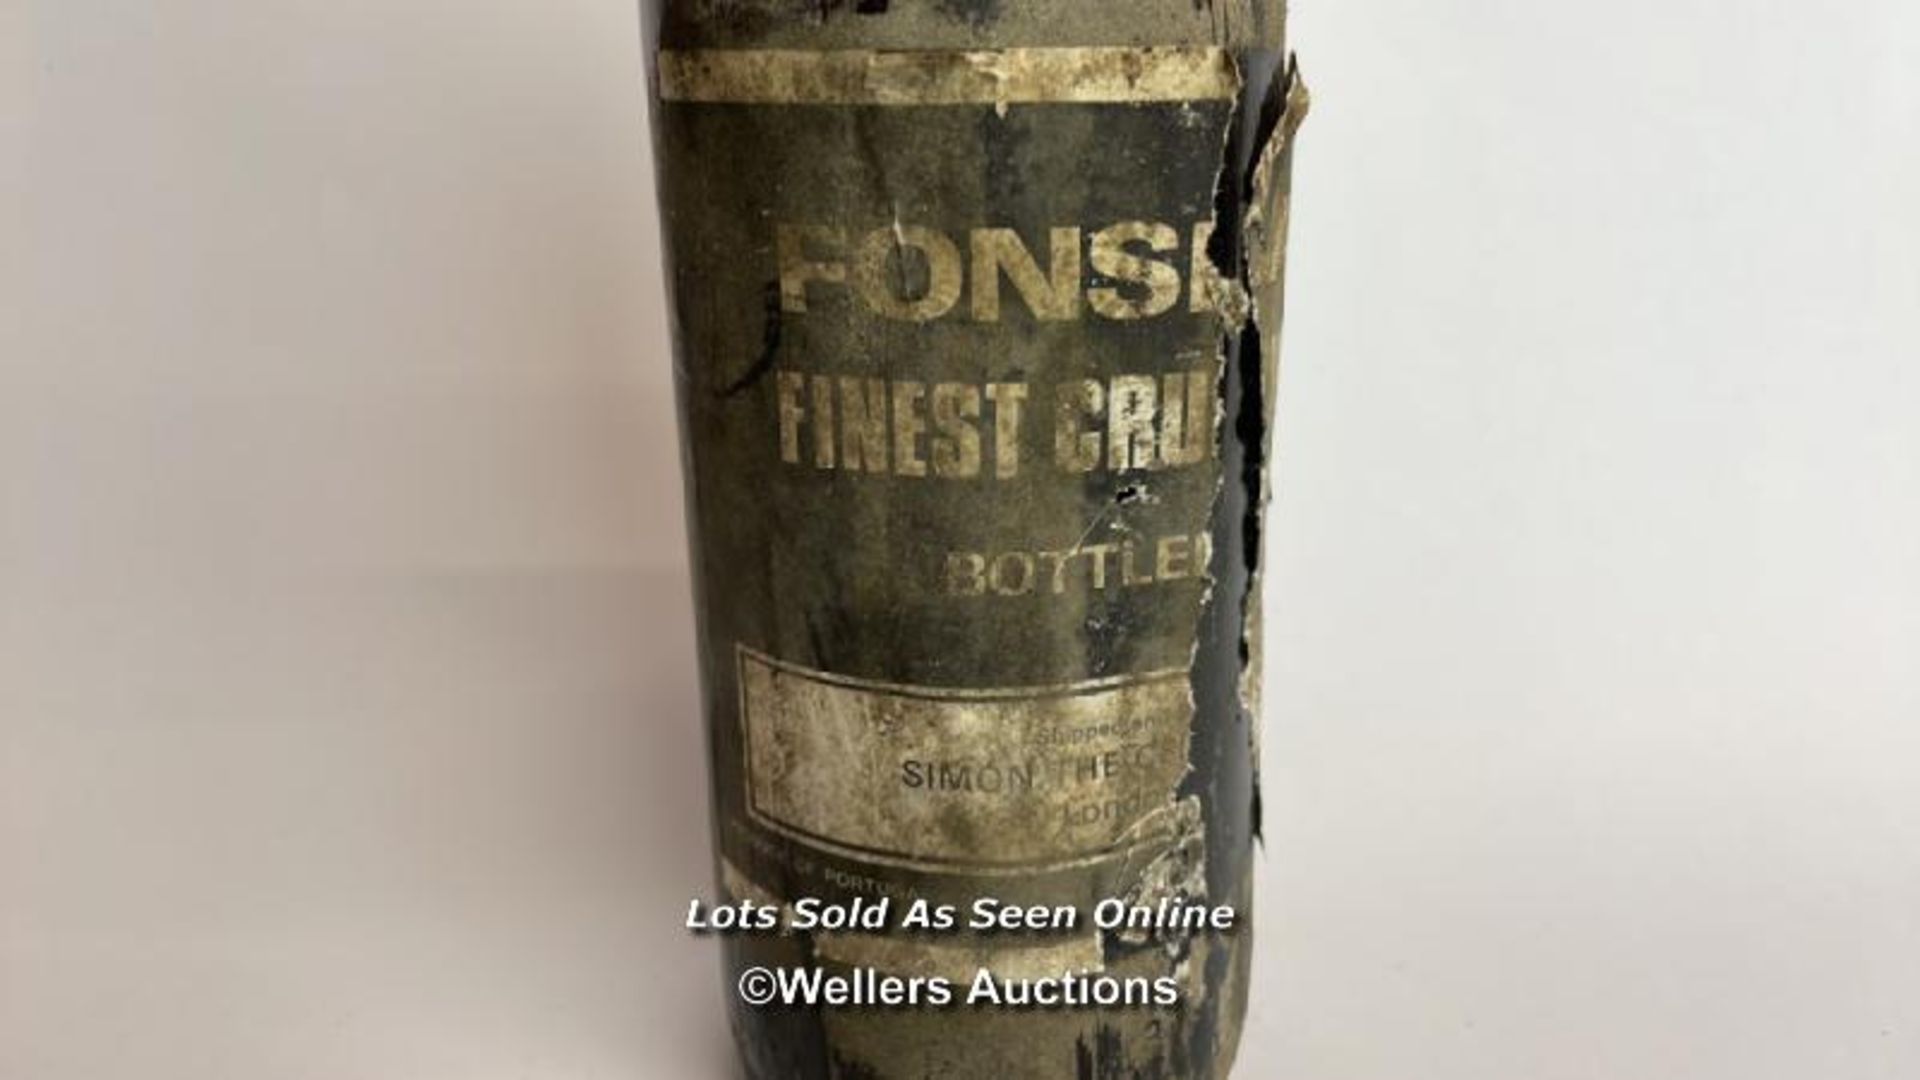 1973 Fonesca's Finest Crusting Port, 26 fl oz / Please see images for fill level and general - Image 2 of 7